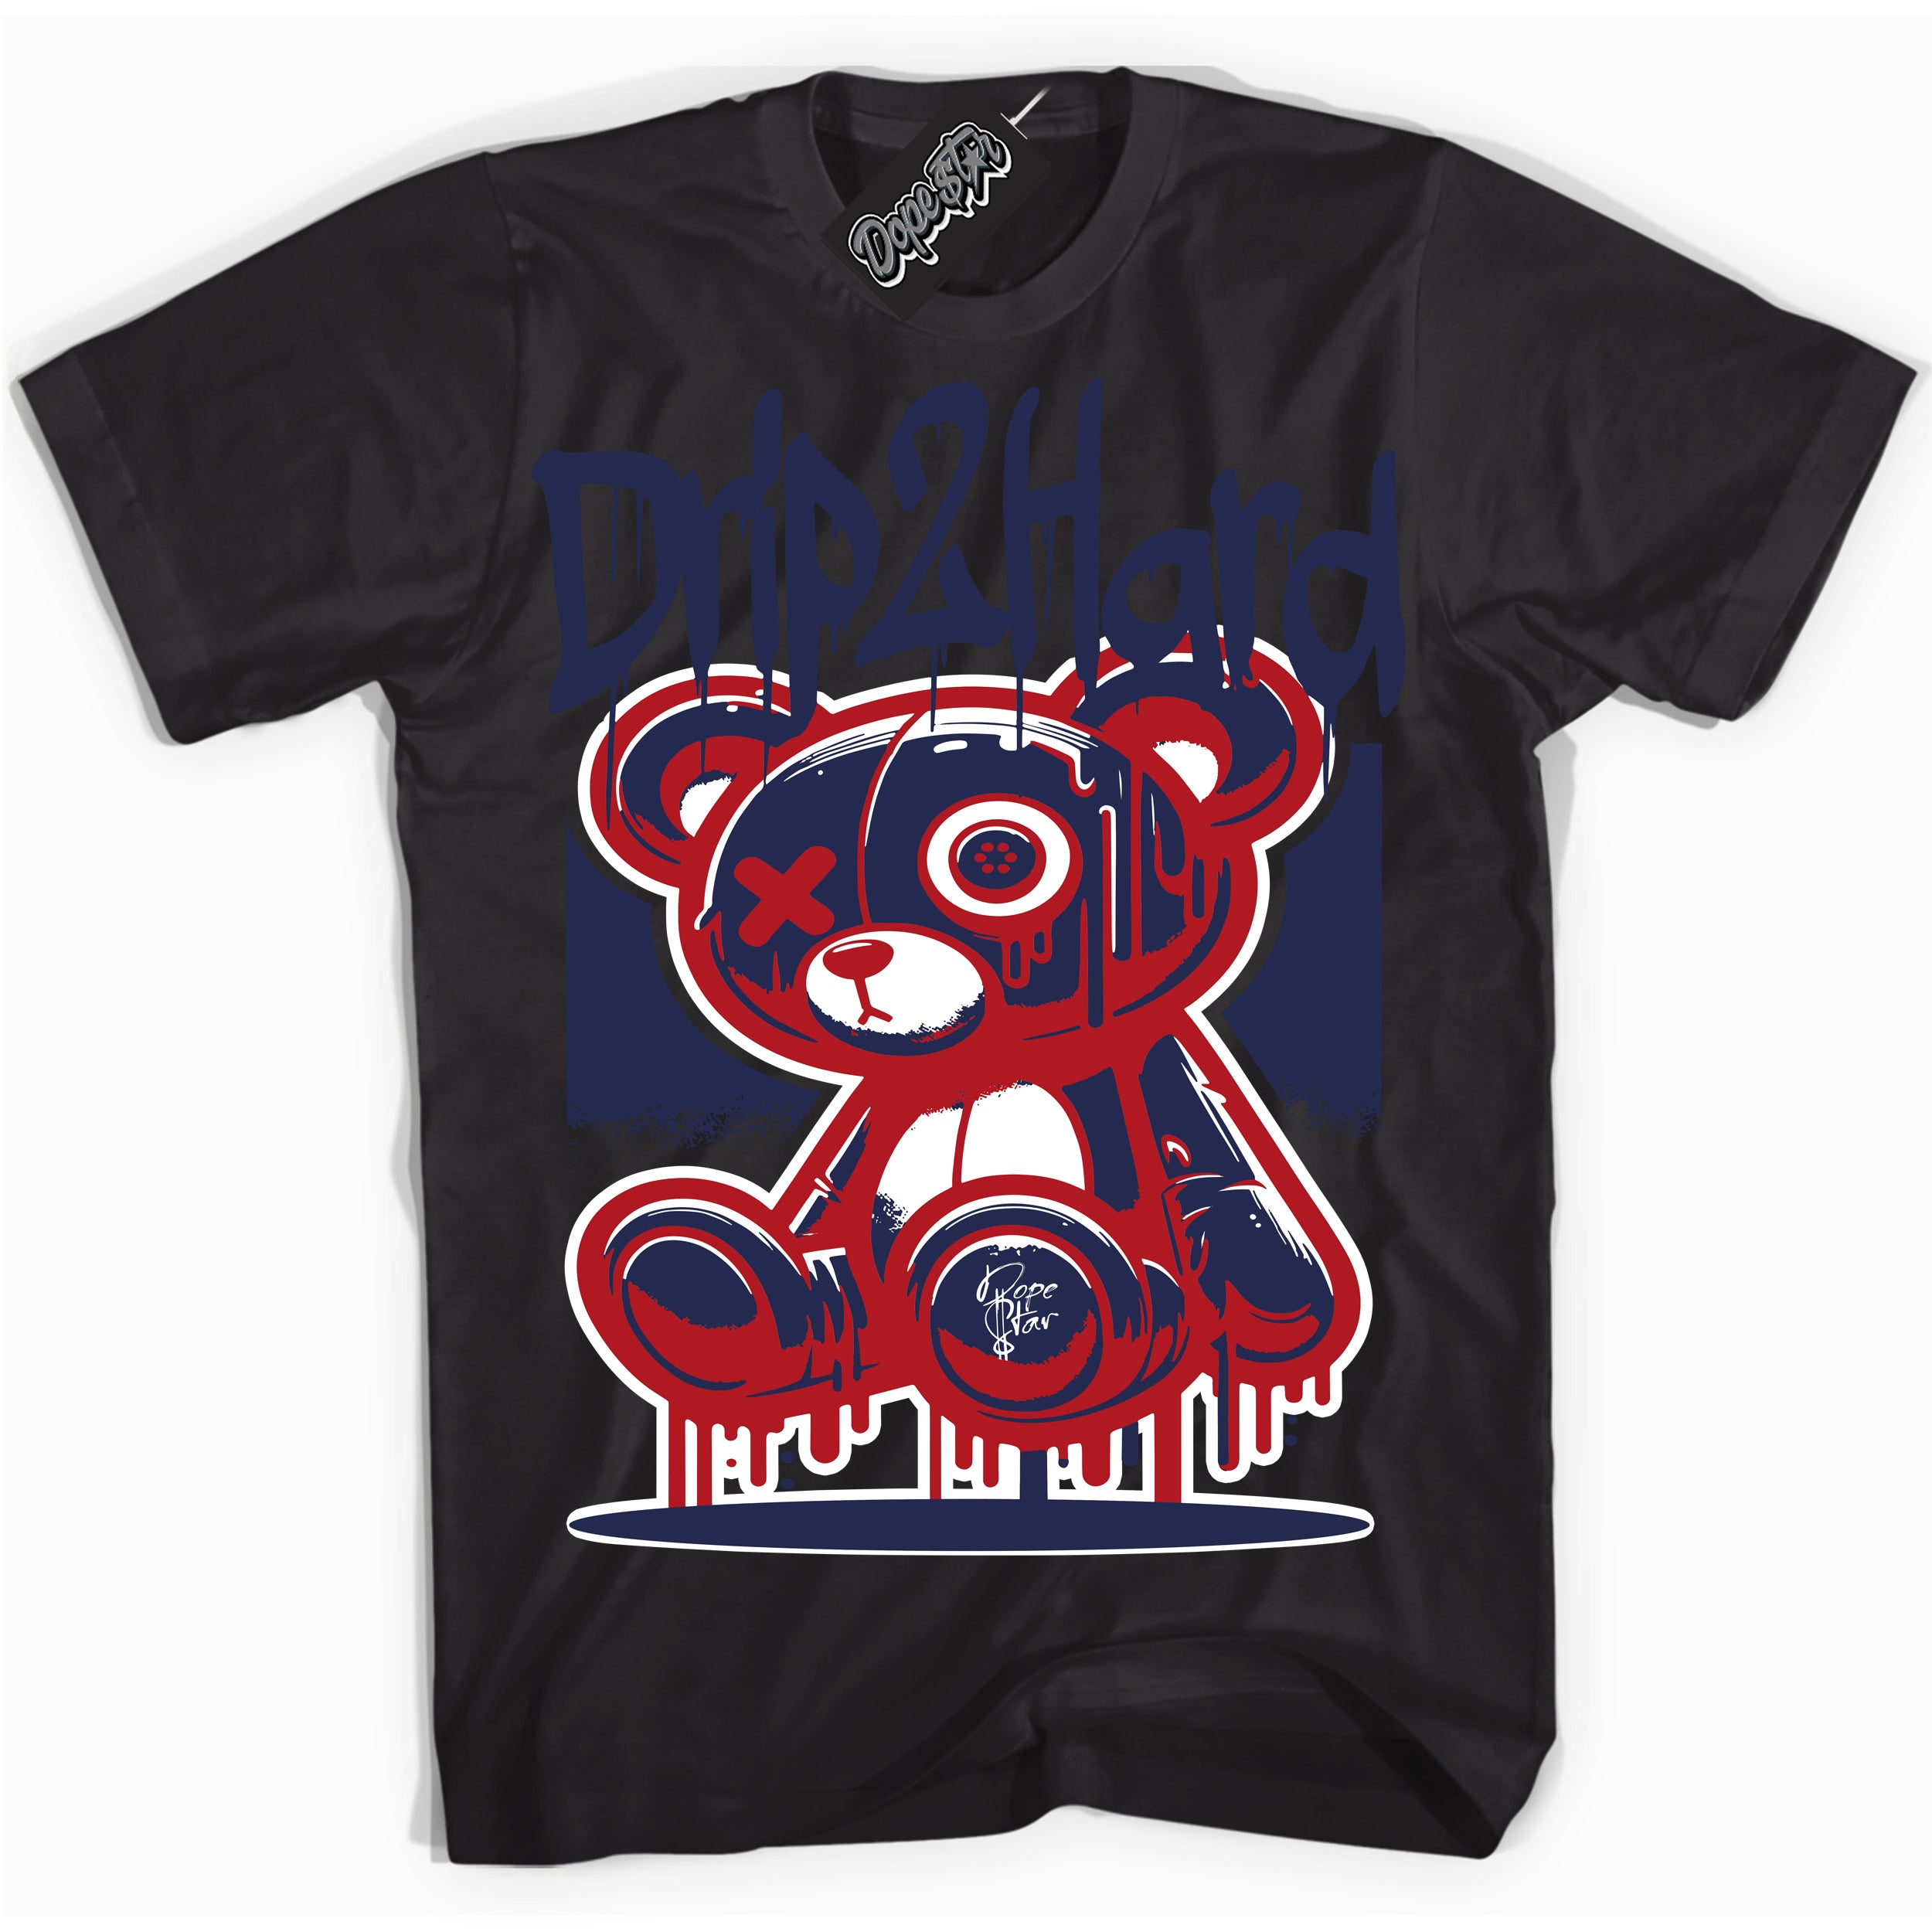 Cool Black graphic tee with “ Drip 2 Hard ” design, that perfectly matches Golf USA 1s